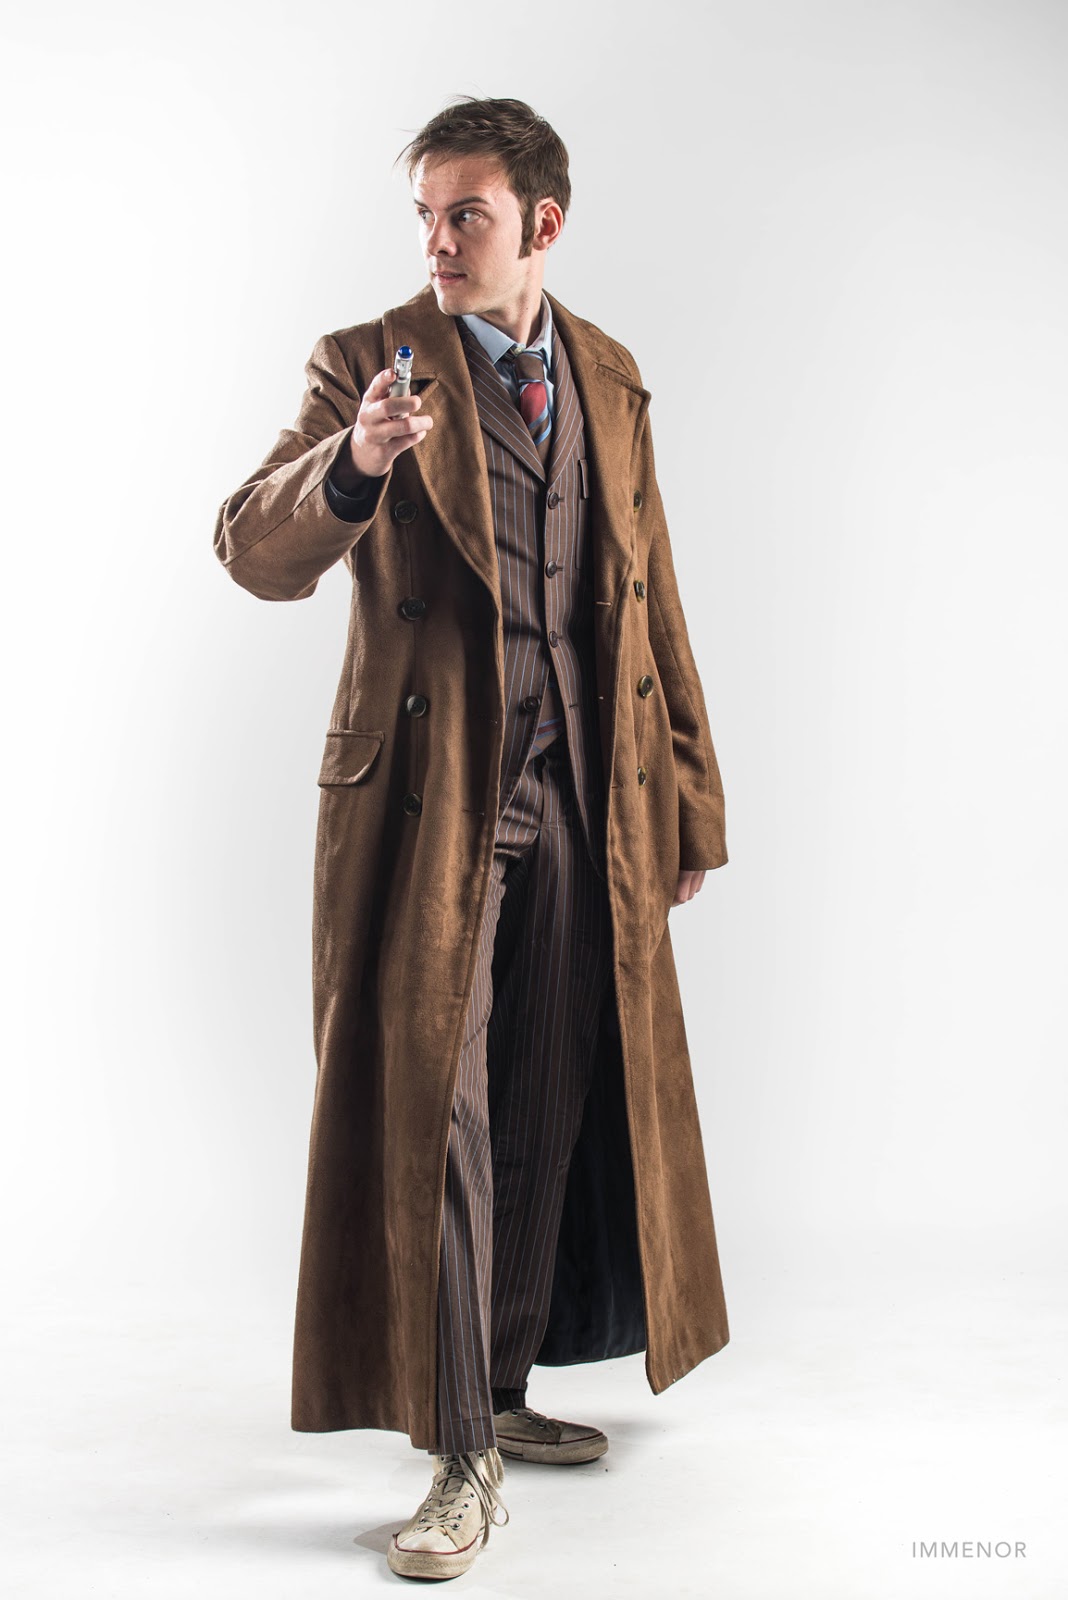 david tennant doctor who suit